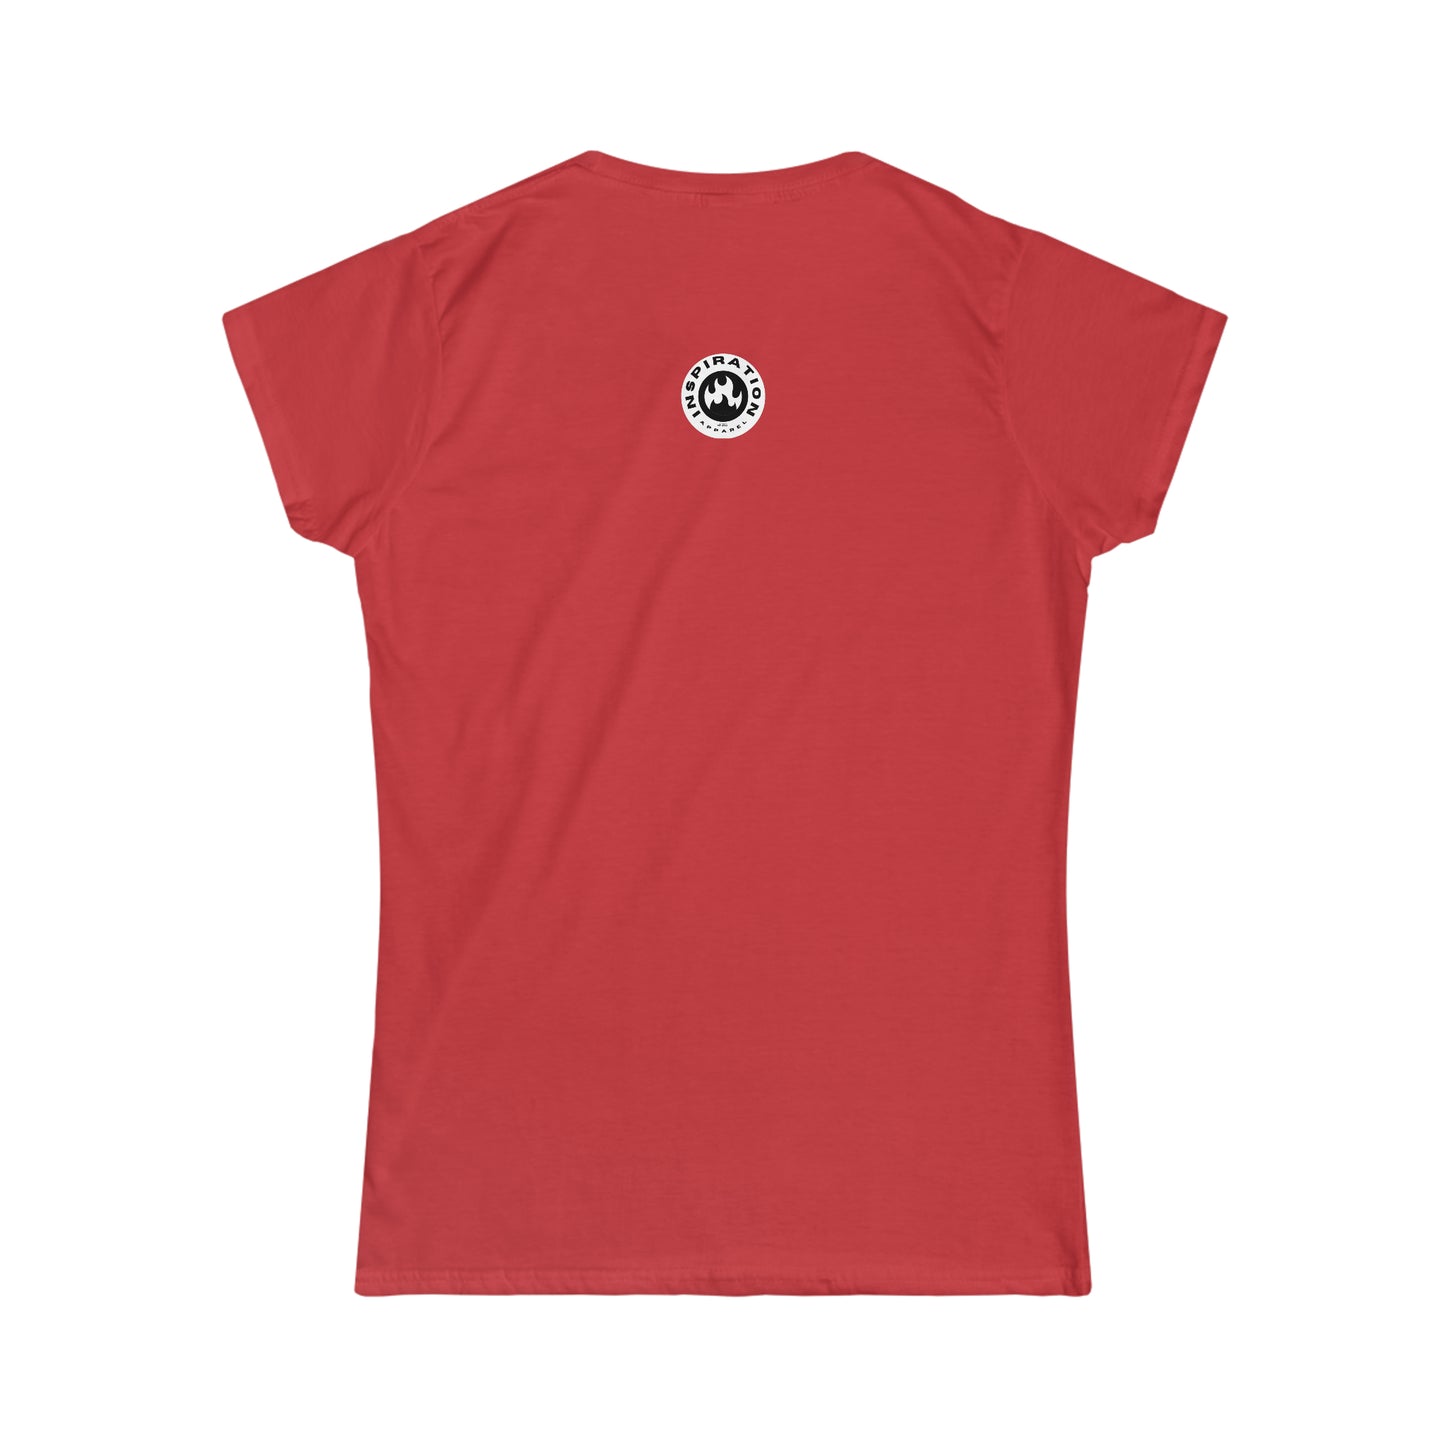 Soul TRANSFORMher ingredient Women's Softstyle Tee